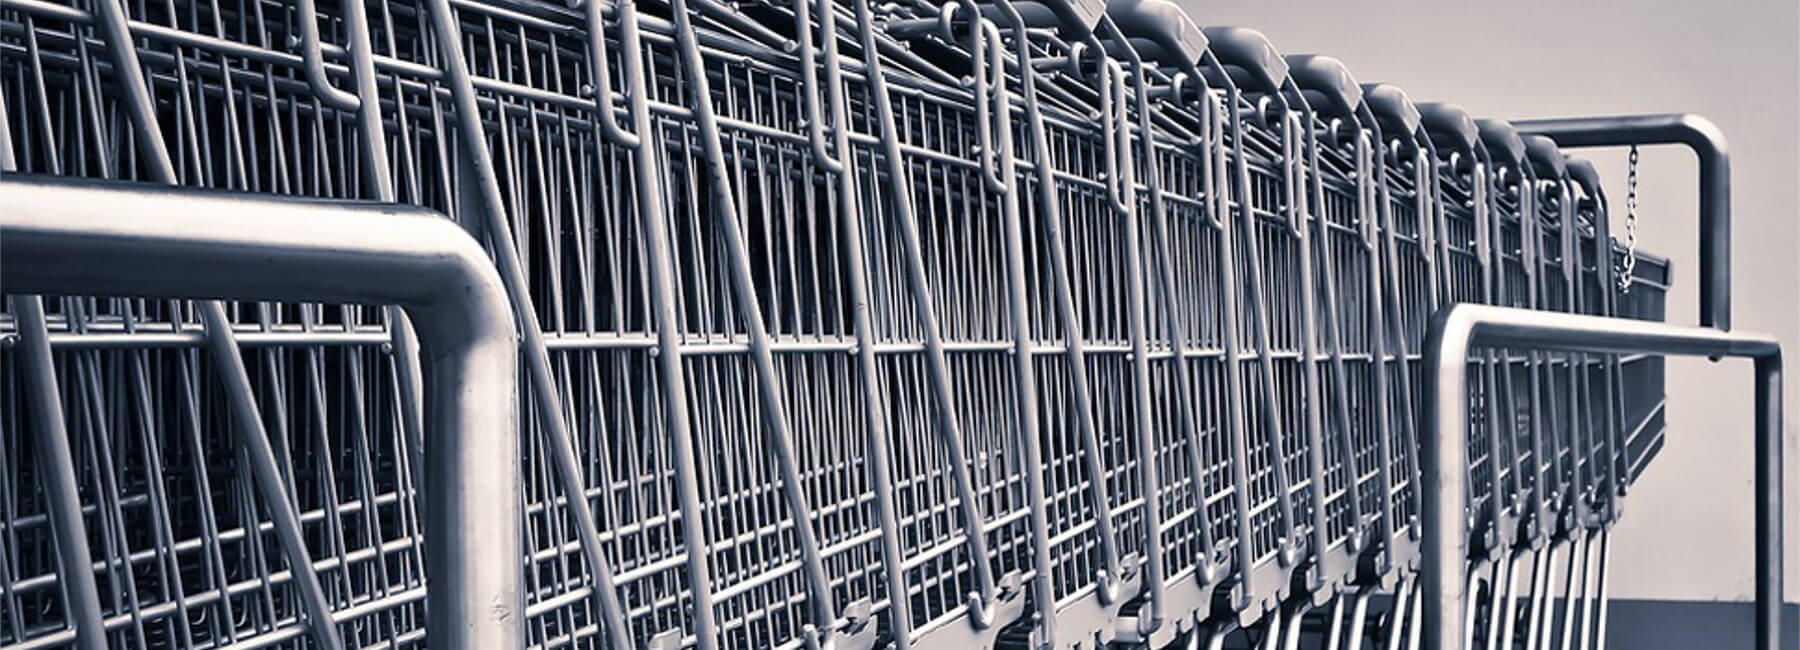 5 UX Strategies to Reduce Shopping Cart Abandonment